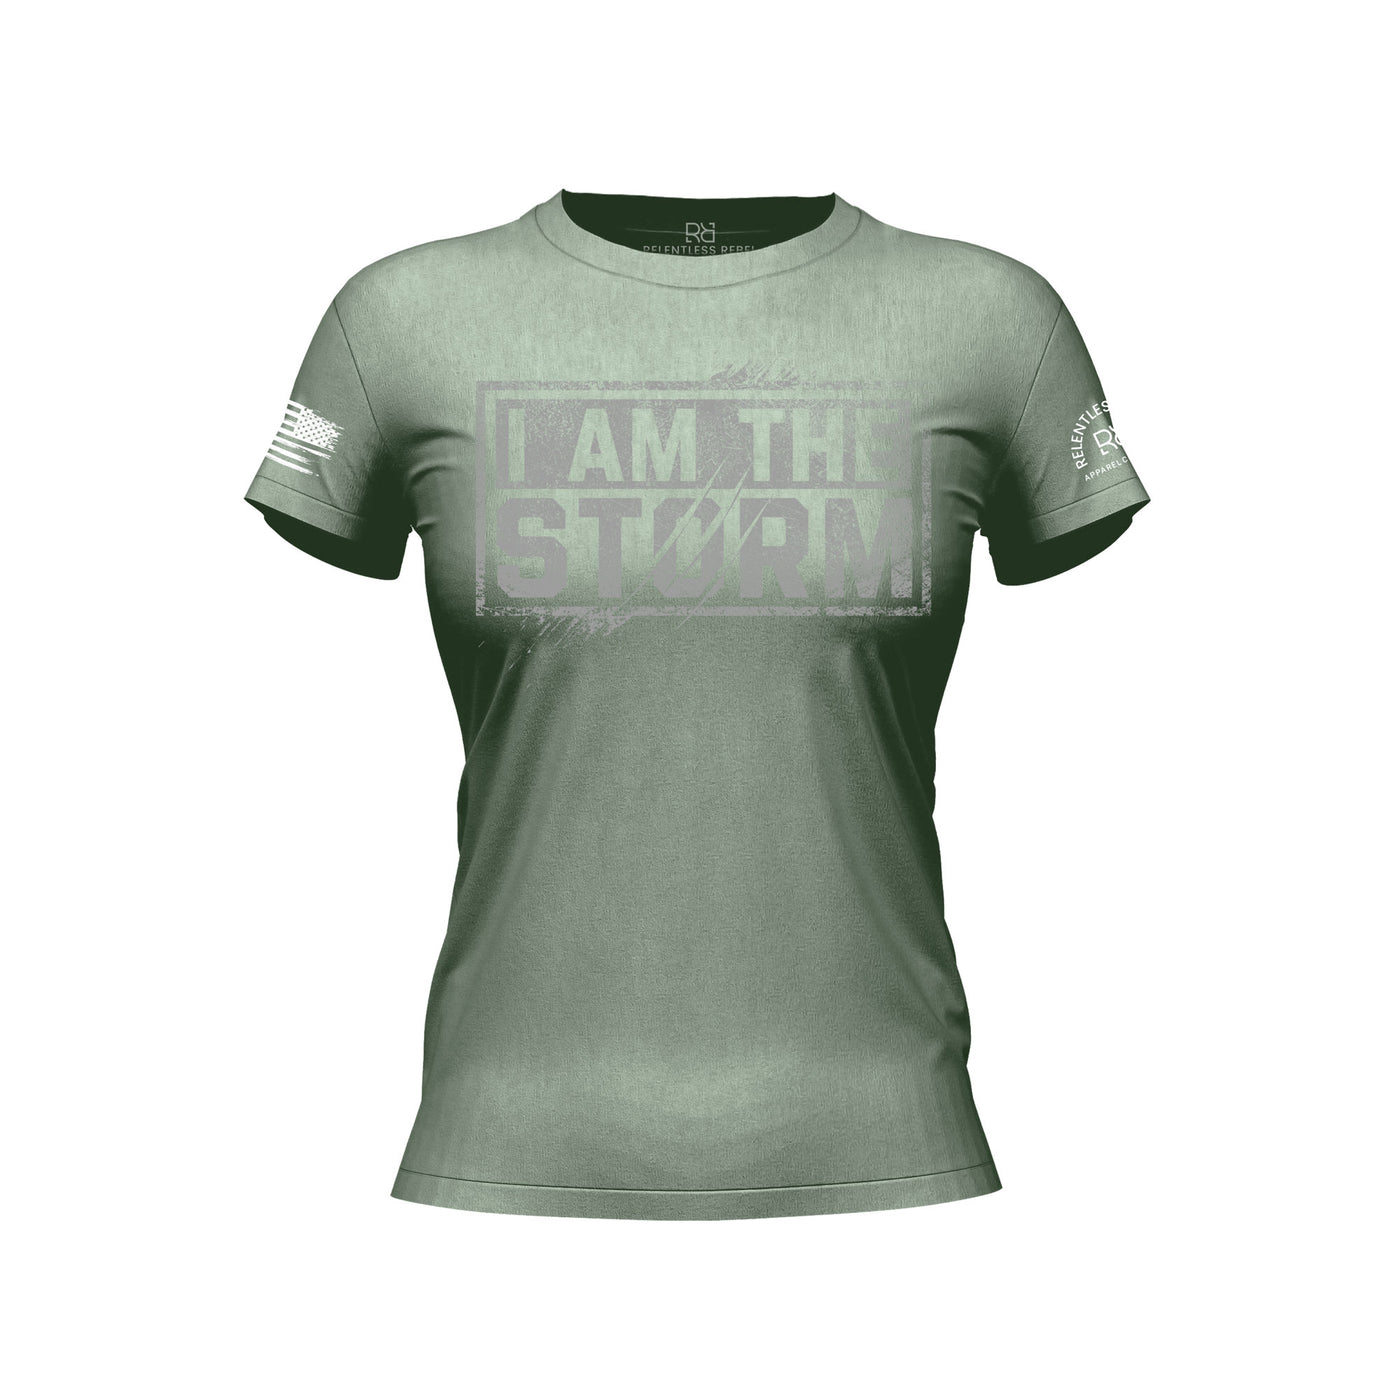 Heather Sage Women's I Am The Storm Front Design Tee